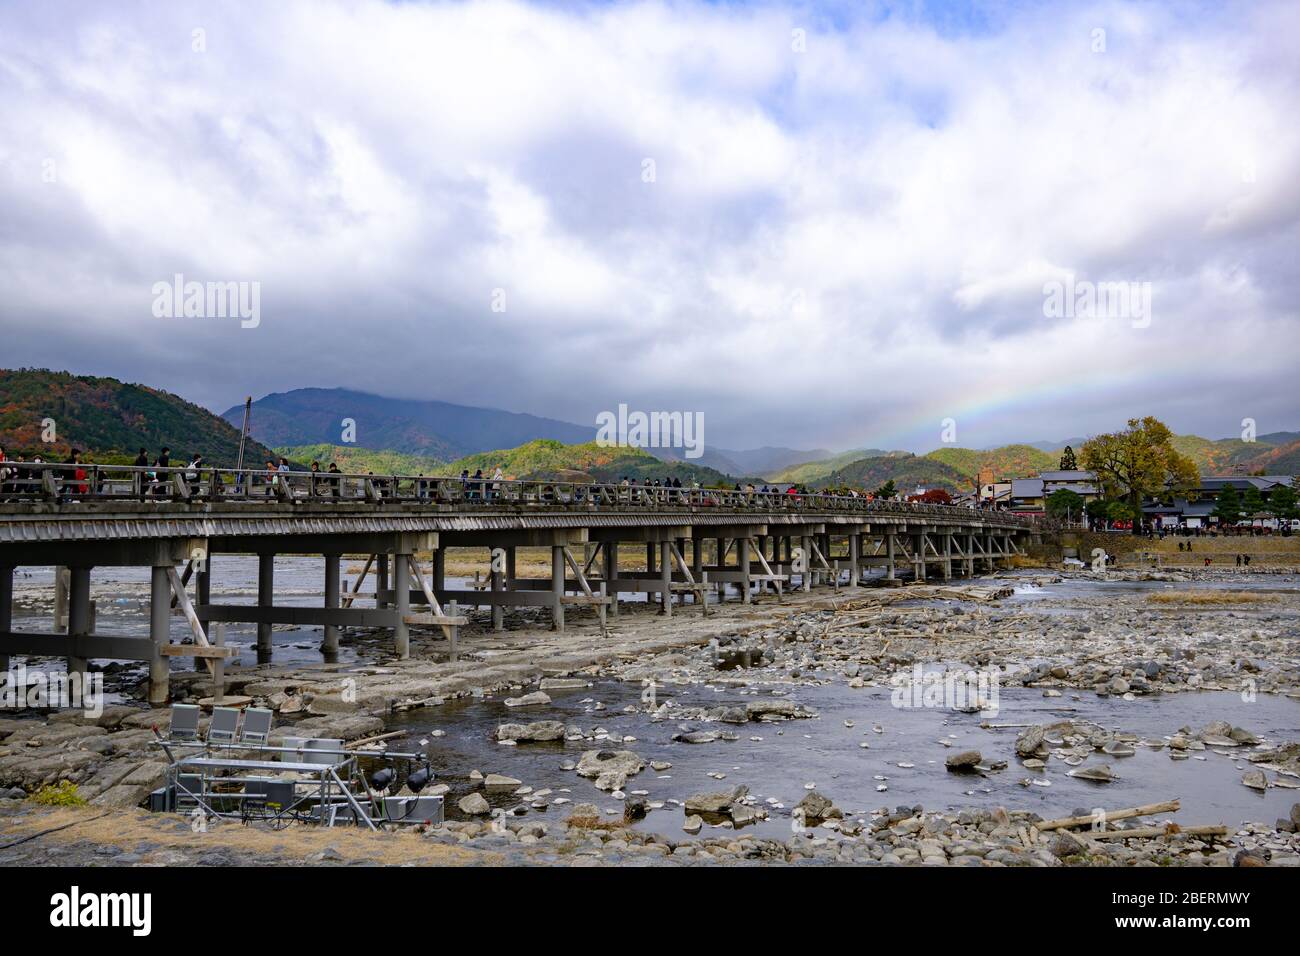 Arashiyama Togetsukyo Bridge was built during the Heian Period (794-1185), and reconstructed in the 1930s crossing the Oi River. Stock Photo